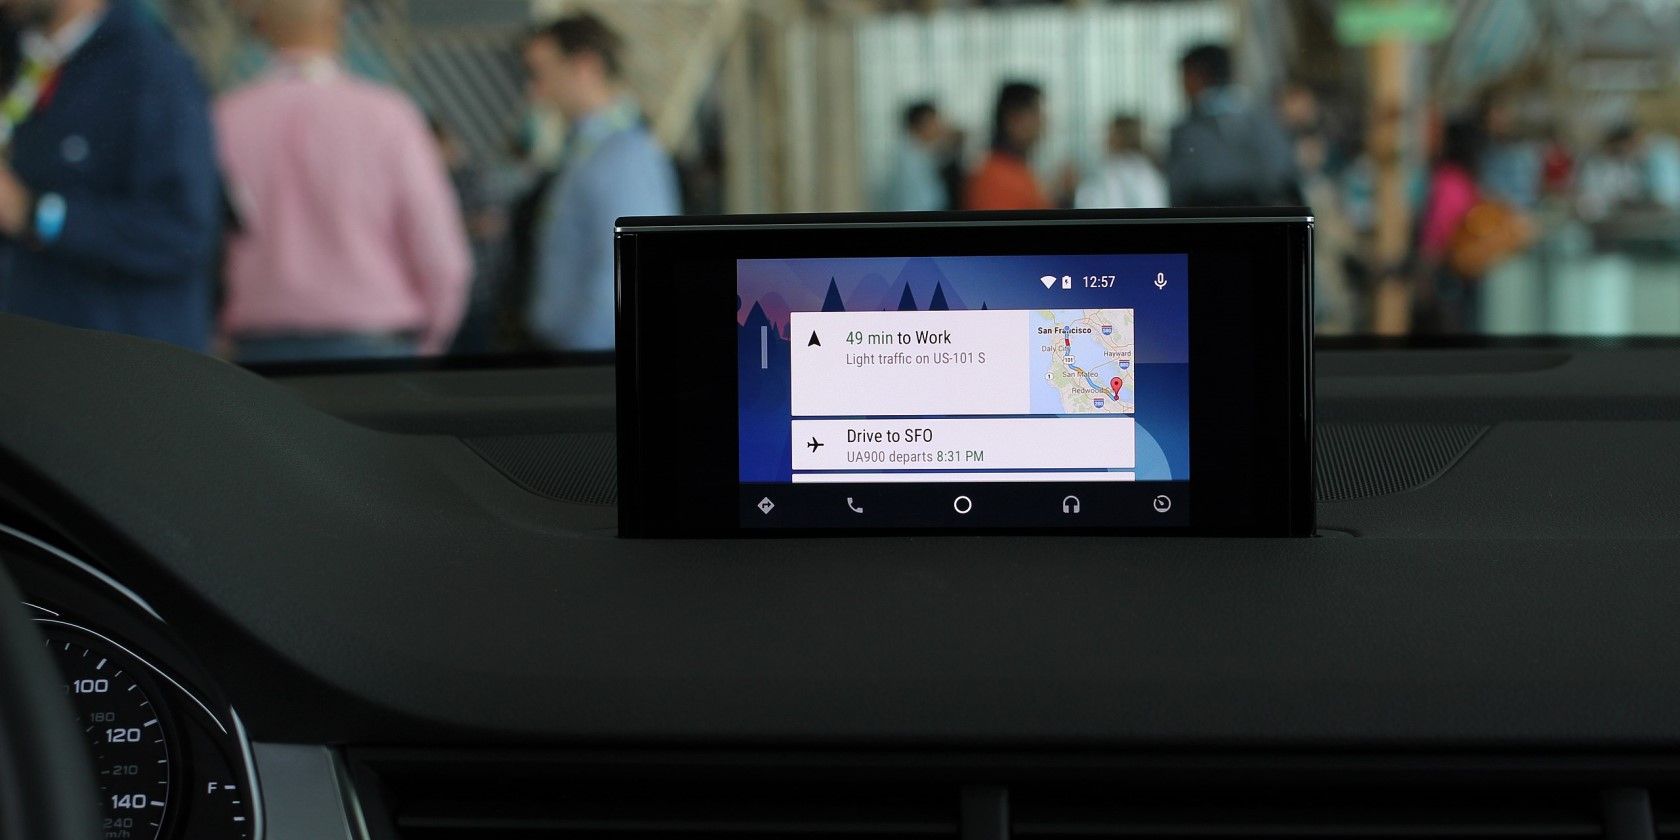 Android Auto on car display